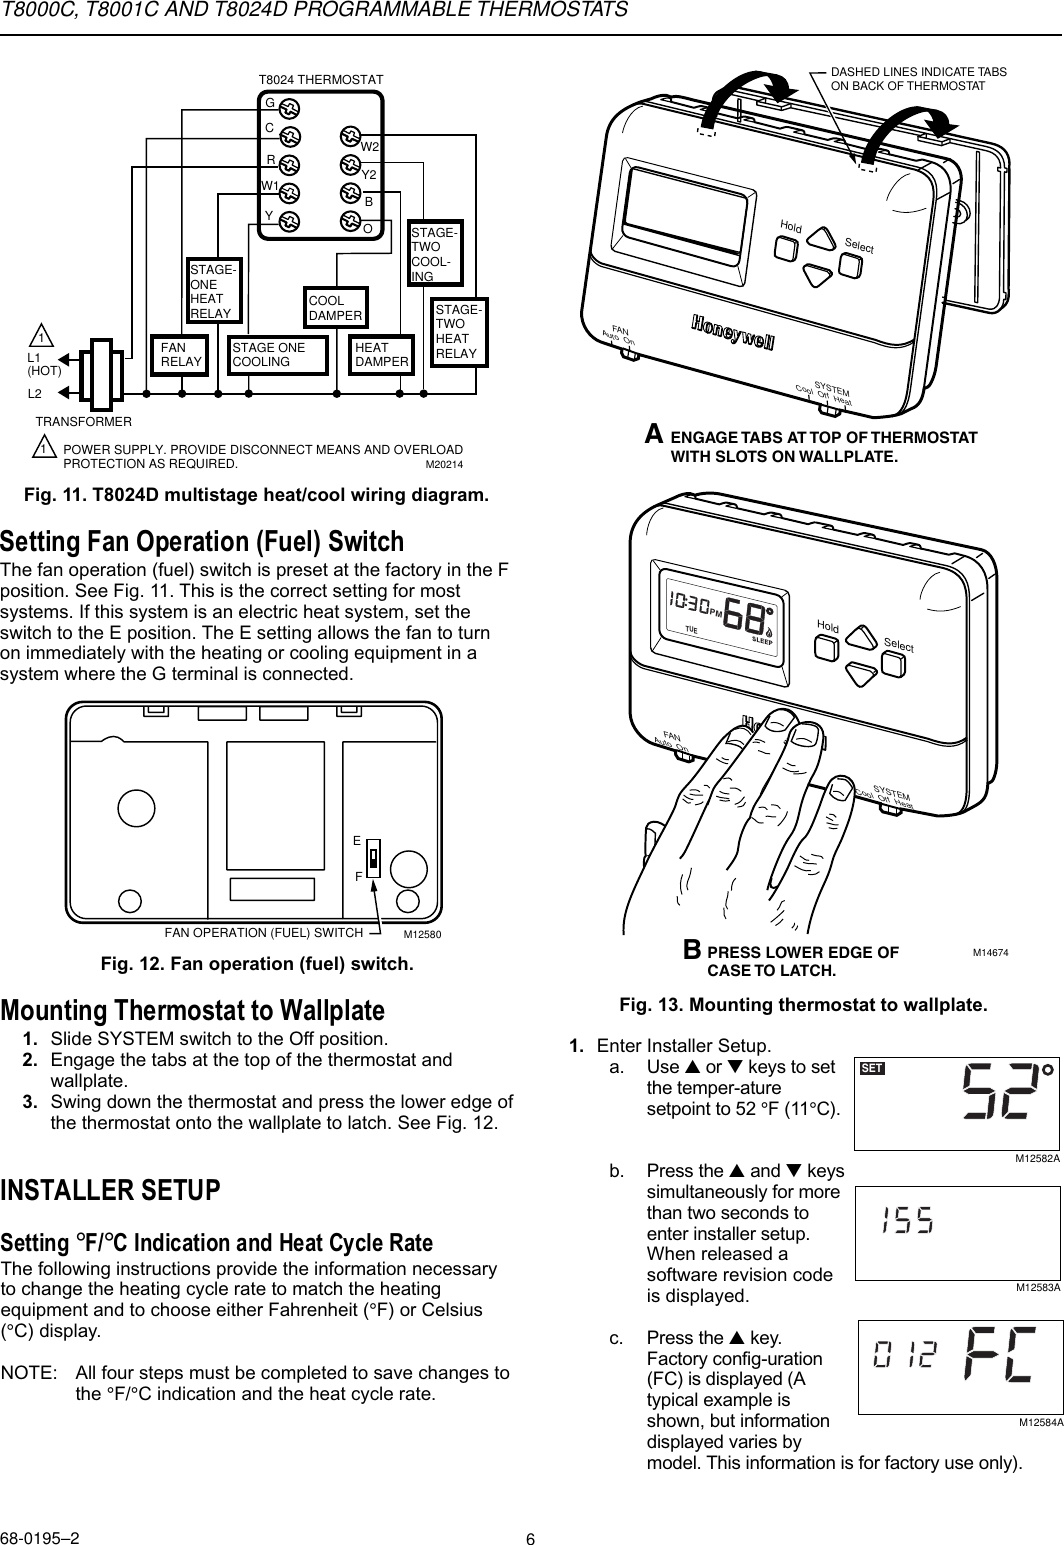 Page 6 of 12 - Honeywell Honeywell-T8024D-Users-Manual- 68-0195  Honeywell-t8024d-users-manual